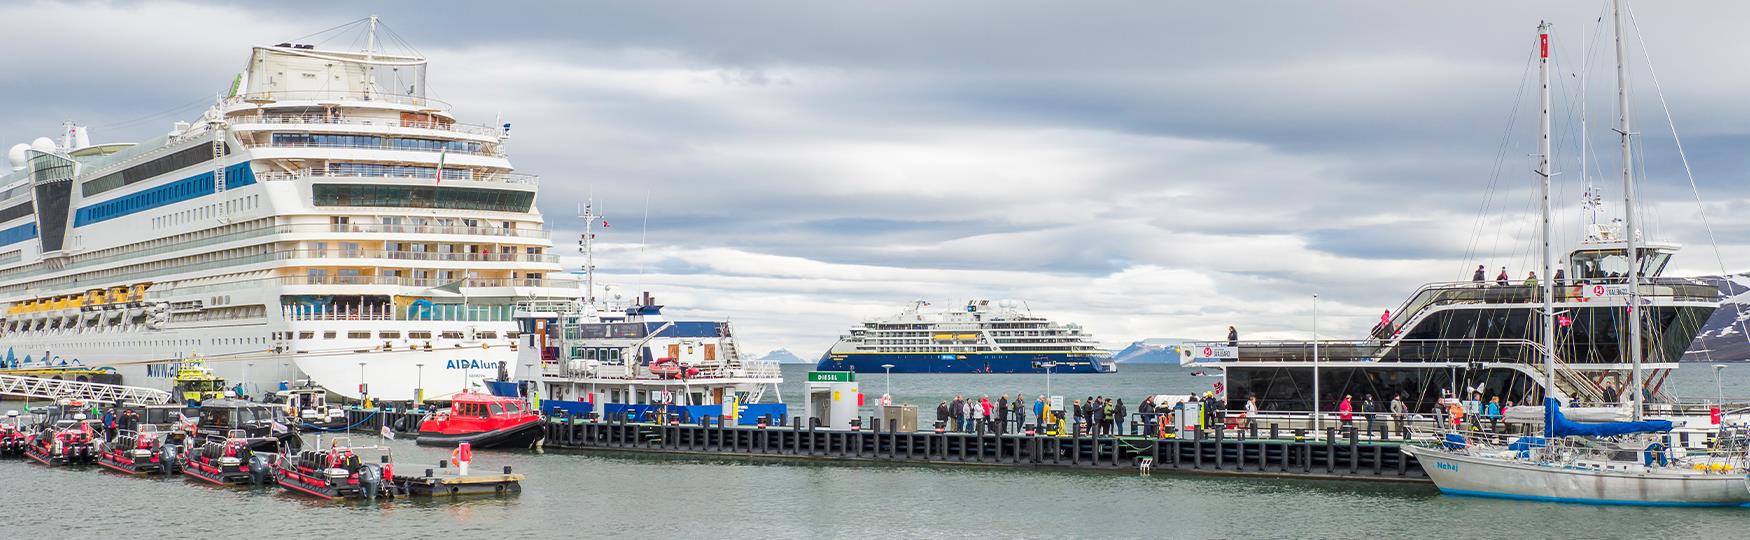 A floating pier with guests on their way to several small and medium-sized boats and ships, with two larger cruise ships in port and on the fjord in the background